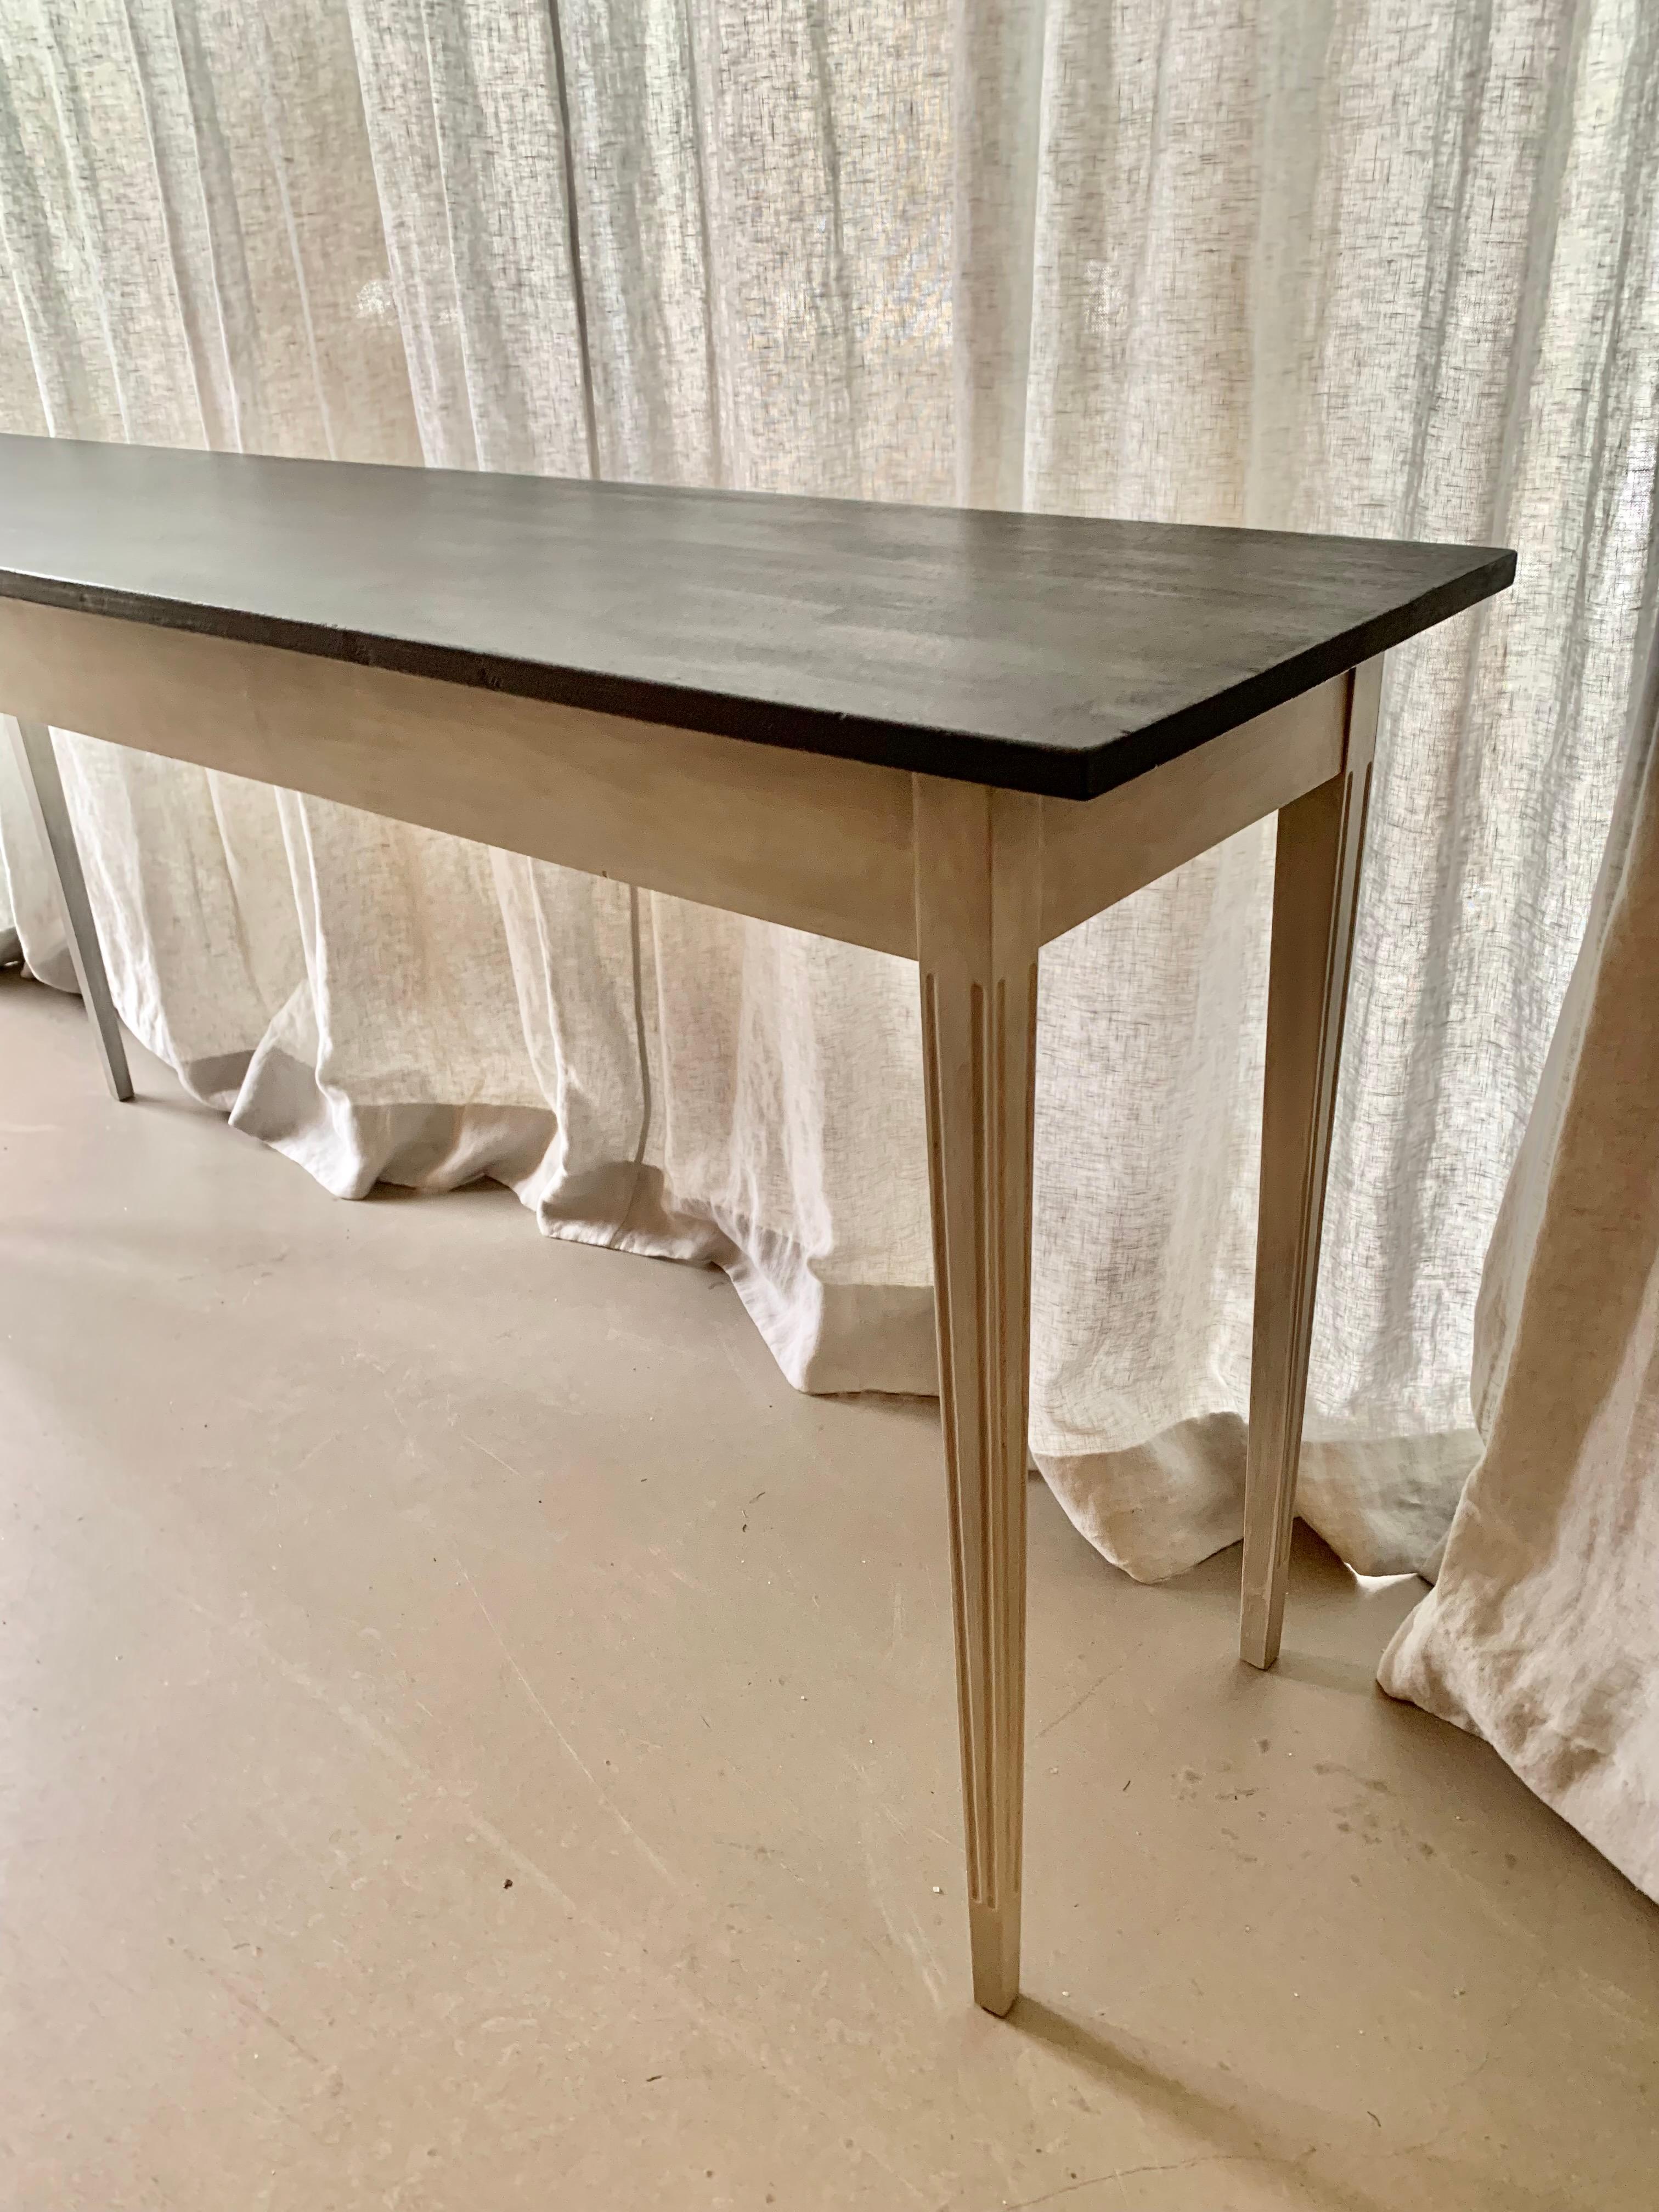 Graceful and long Gustavian style console table with grey patinated elegantly tapered legs with vertically carved details and a black painted table top. Great for the large hallway or living room.
